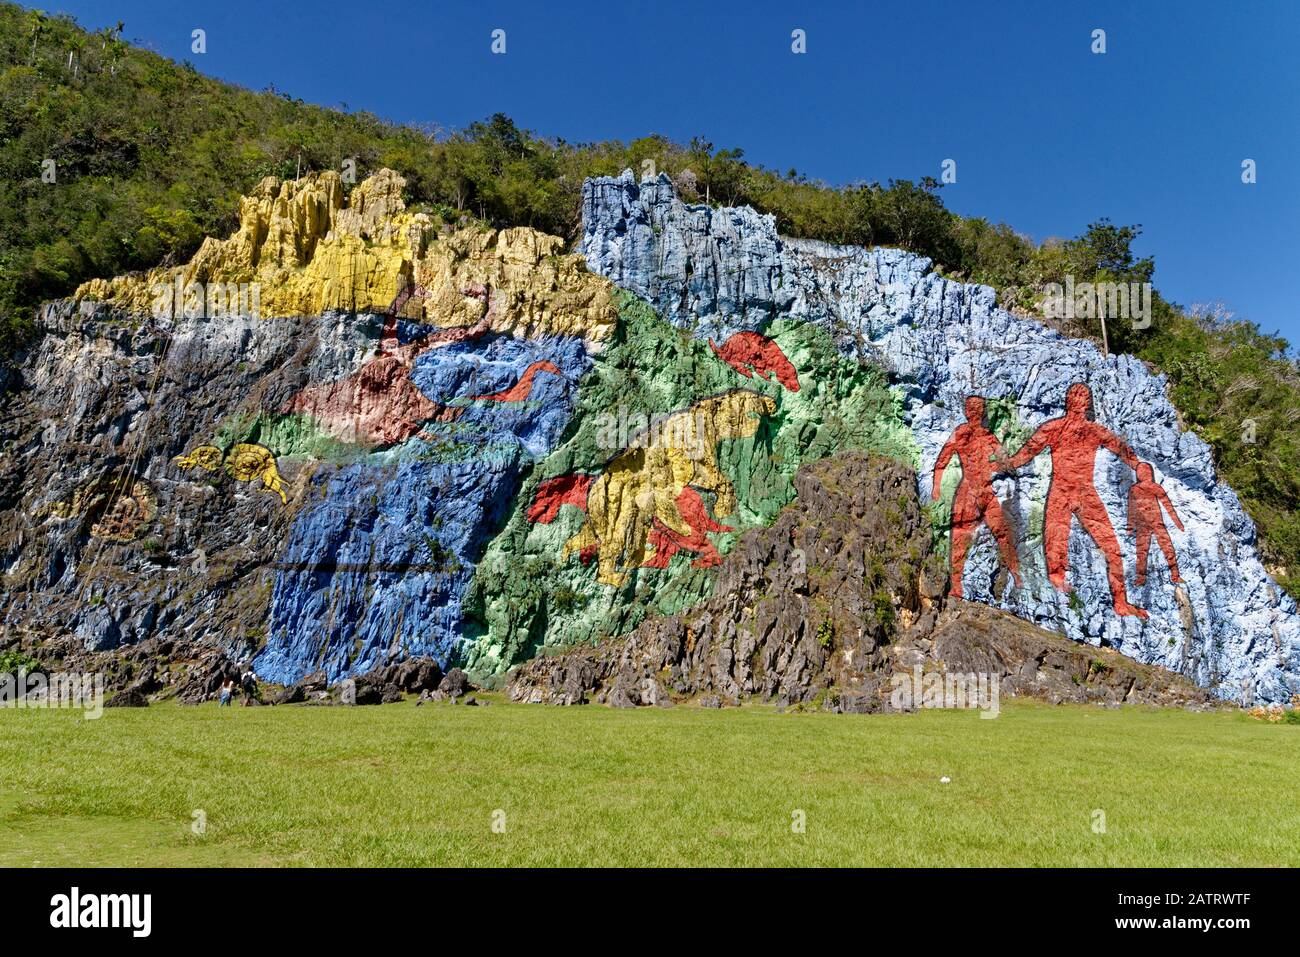 The Mural de la Prehistoria is a mural painted in 1961 by Leovigildo Gonzalez Morillo on a rocky side of the mountain Mogote Dos Hermanas Stock Photo